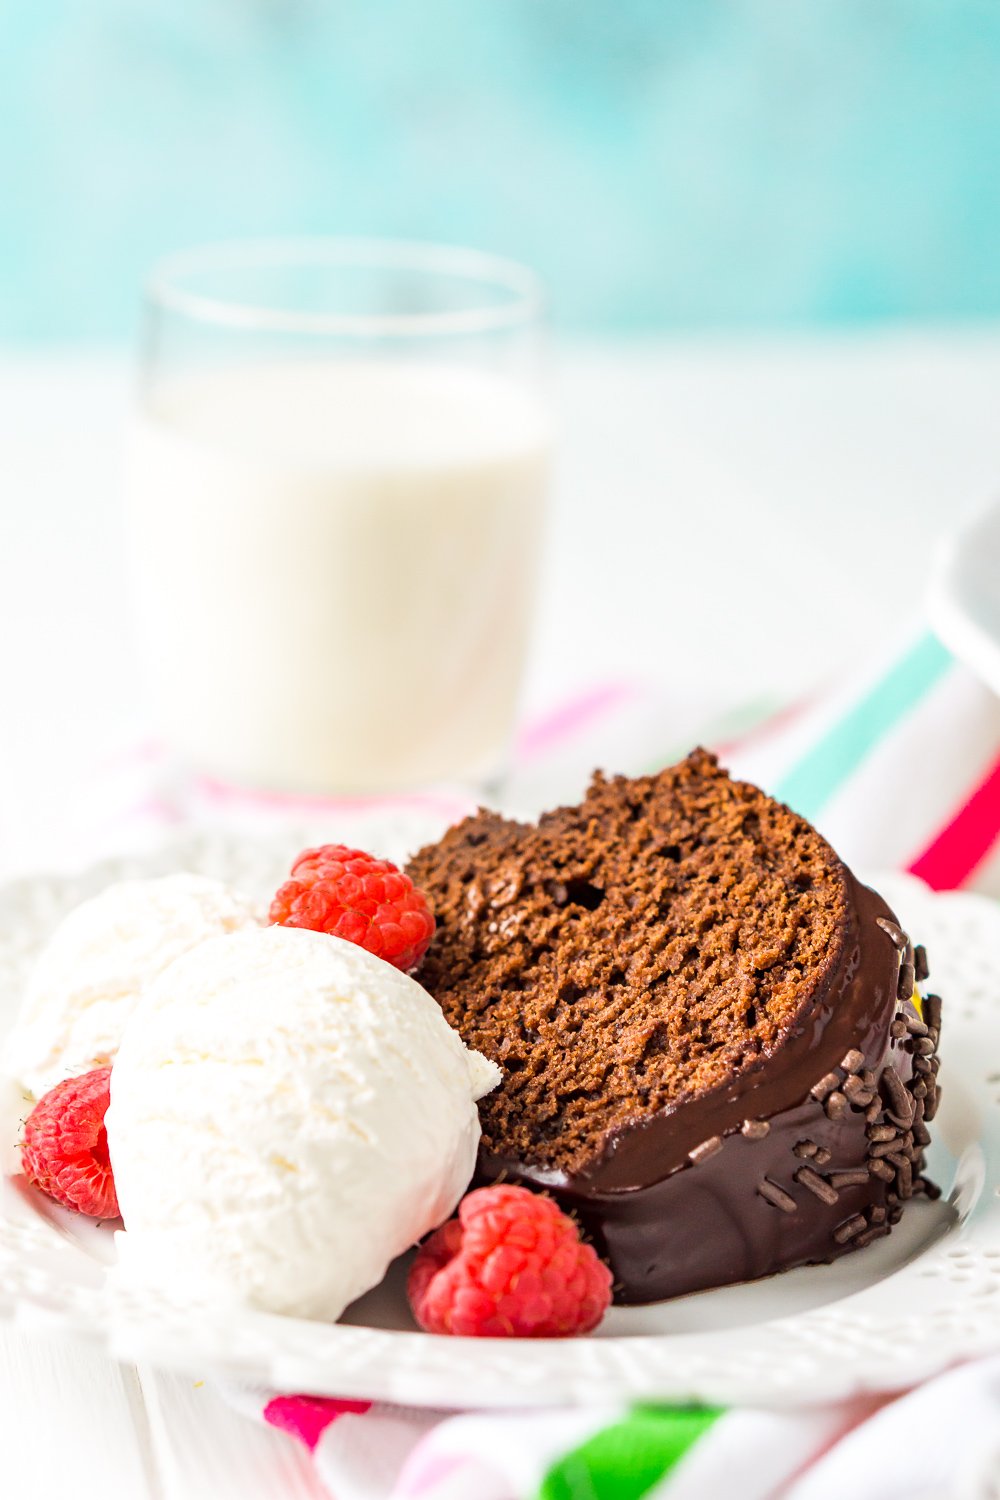 Slice of healthy chocolate cake on white plate with ice cream and fresh raspberries served with a glass of milk.